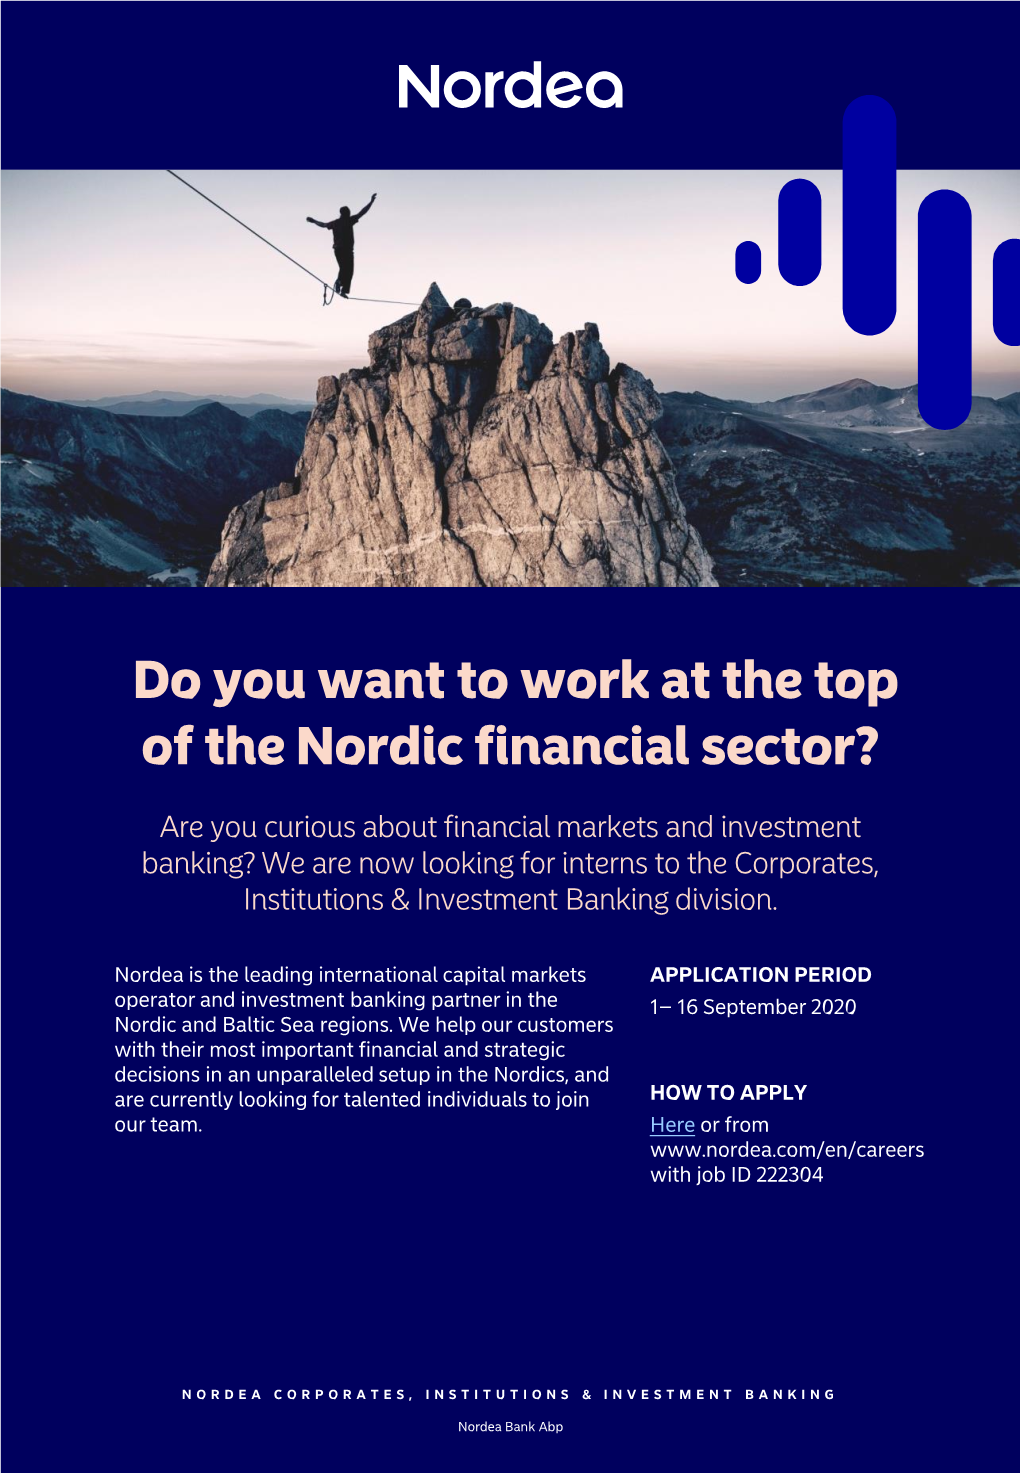 Do You Want to Work at the Top of the Nordic Financial Sector?